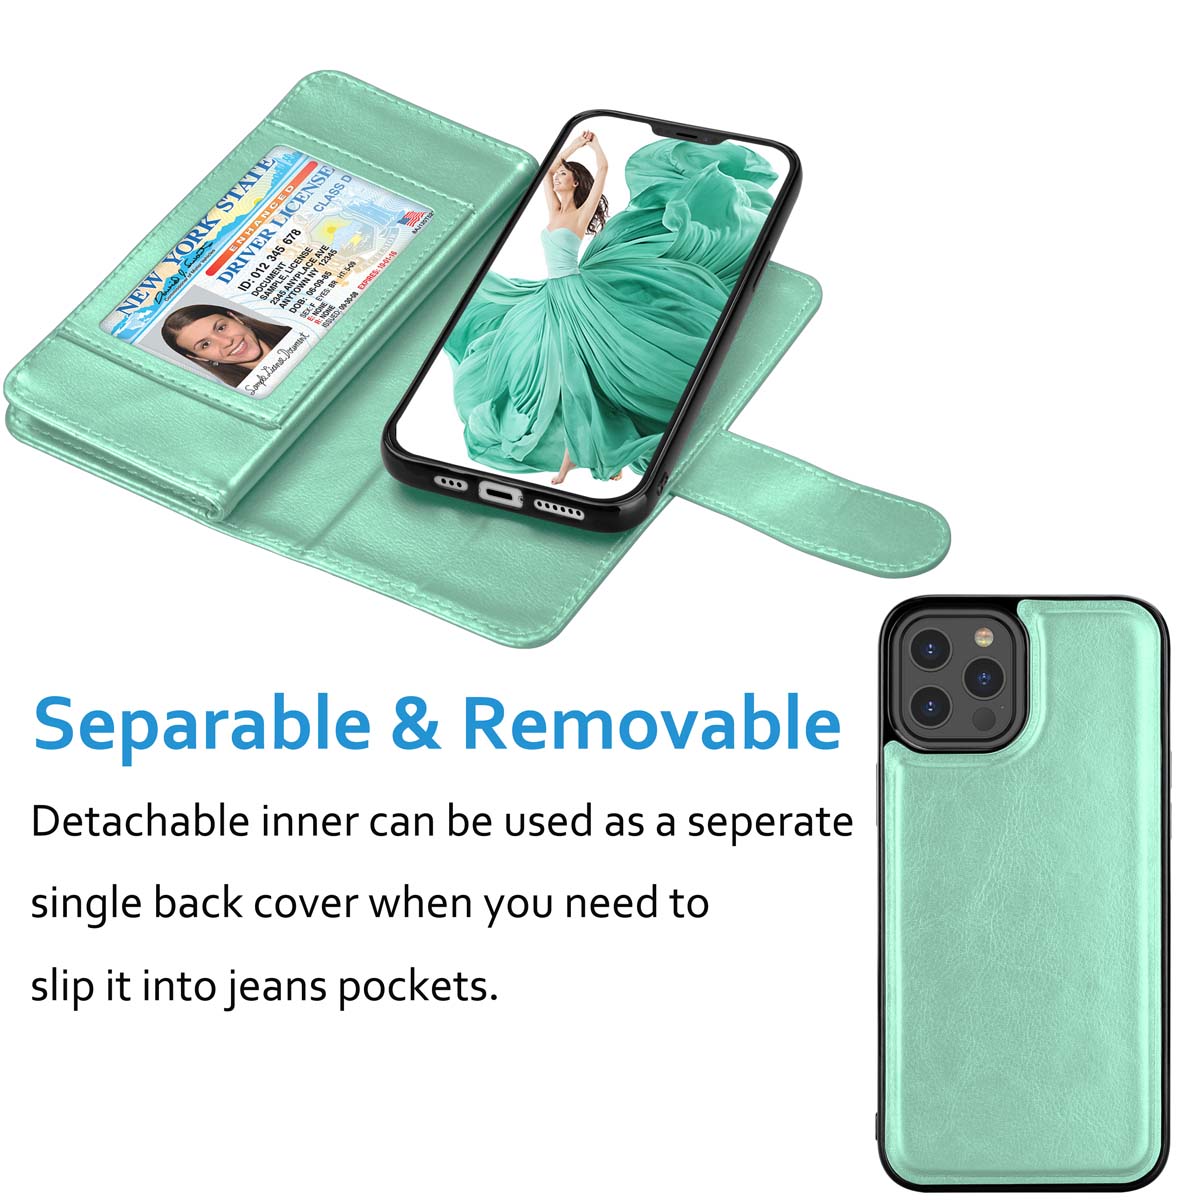 iPhone 12 Mini Case, Wallet Case iPhone 12, iPhone 12 Mini PU Leather Case, Njjex PU Leather Magnet Stand Wallet Credit Card Holder Flip Case 9 Card Slots Case for Apple iPhone 12 Mini 5.4" 2020 -Mint - image 4 of 6